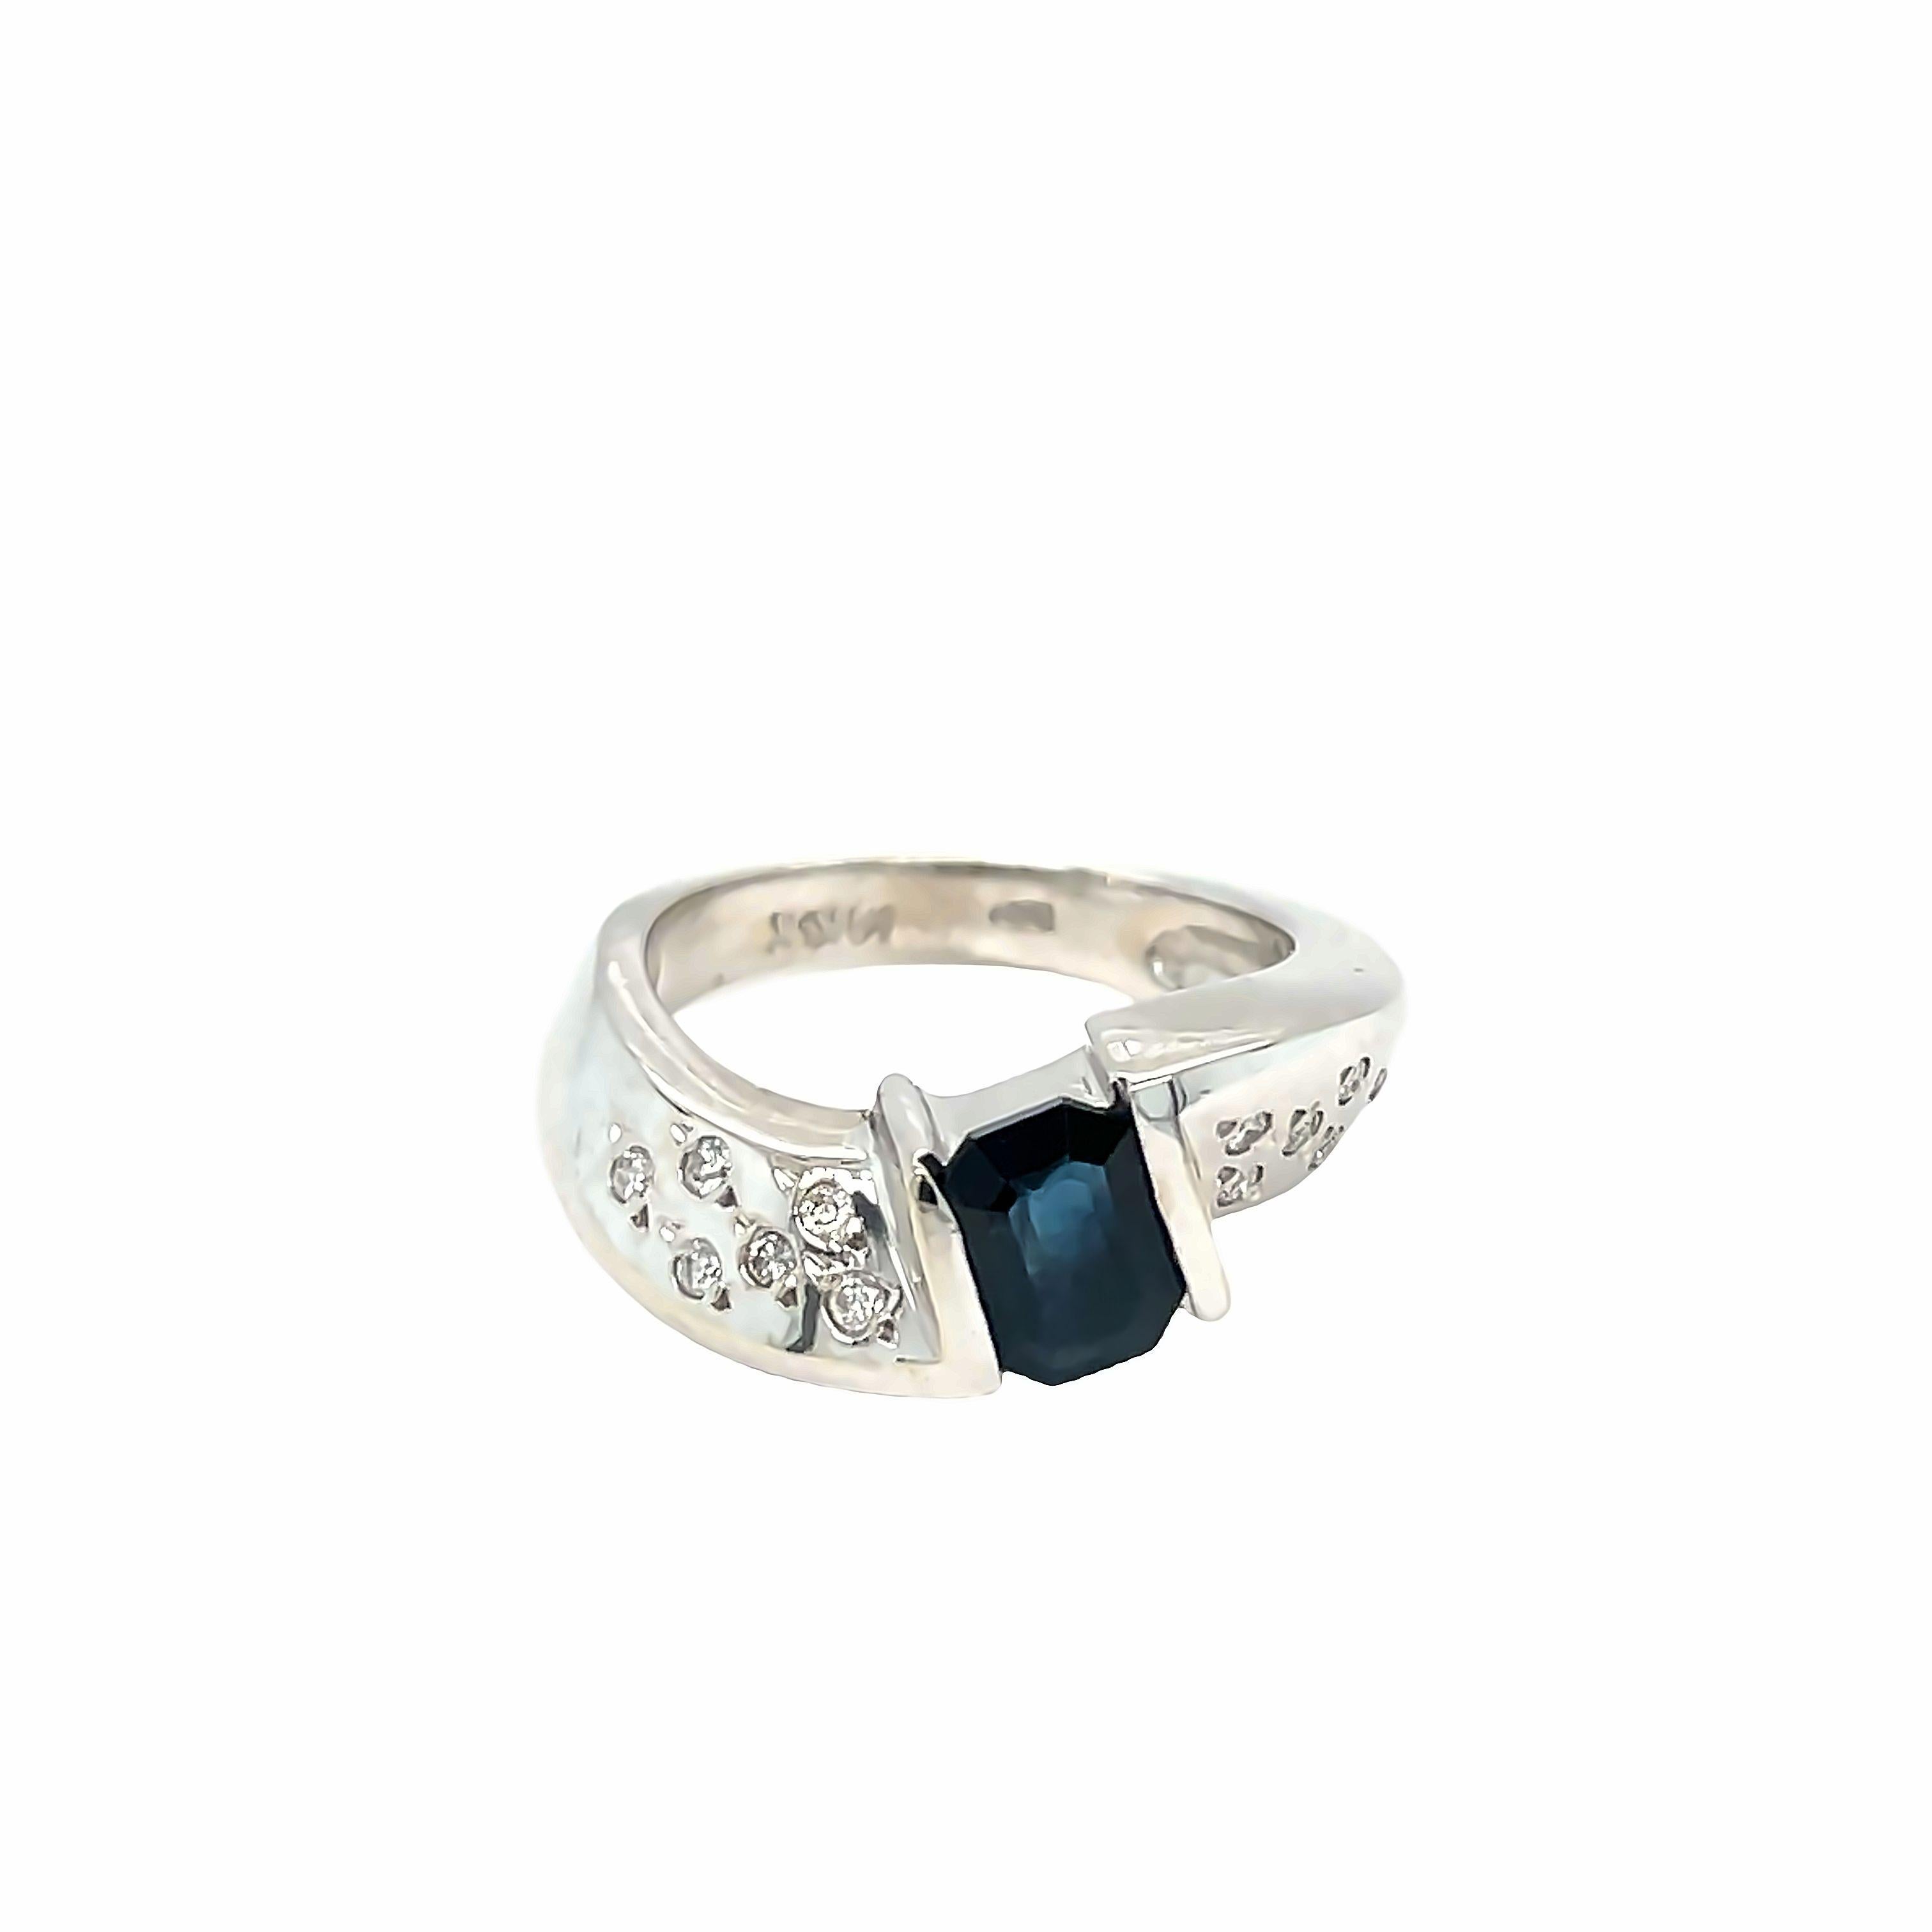 Elegant and contemporary, this 14K White Gold Sapphire Diamond Ring features a stunning radiant cut Sapphire weighing approximately 0.90 carat. Sapphire is beautifully showcased in a half-bezel setting, complemented by a dome setting adorned with